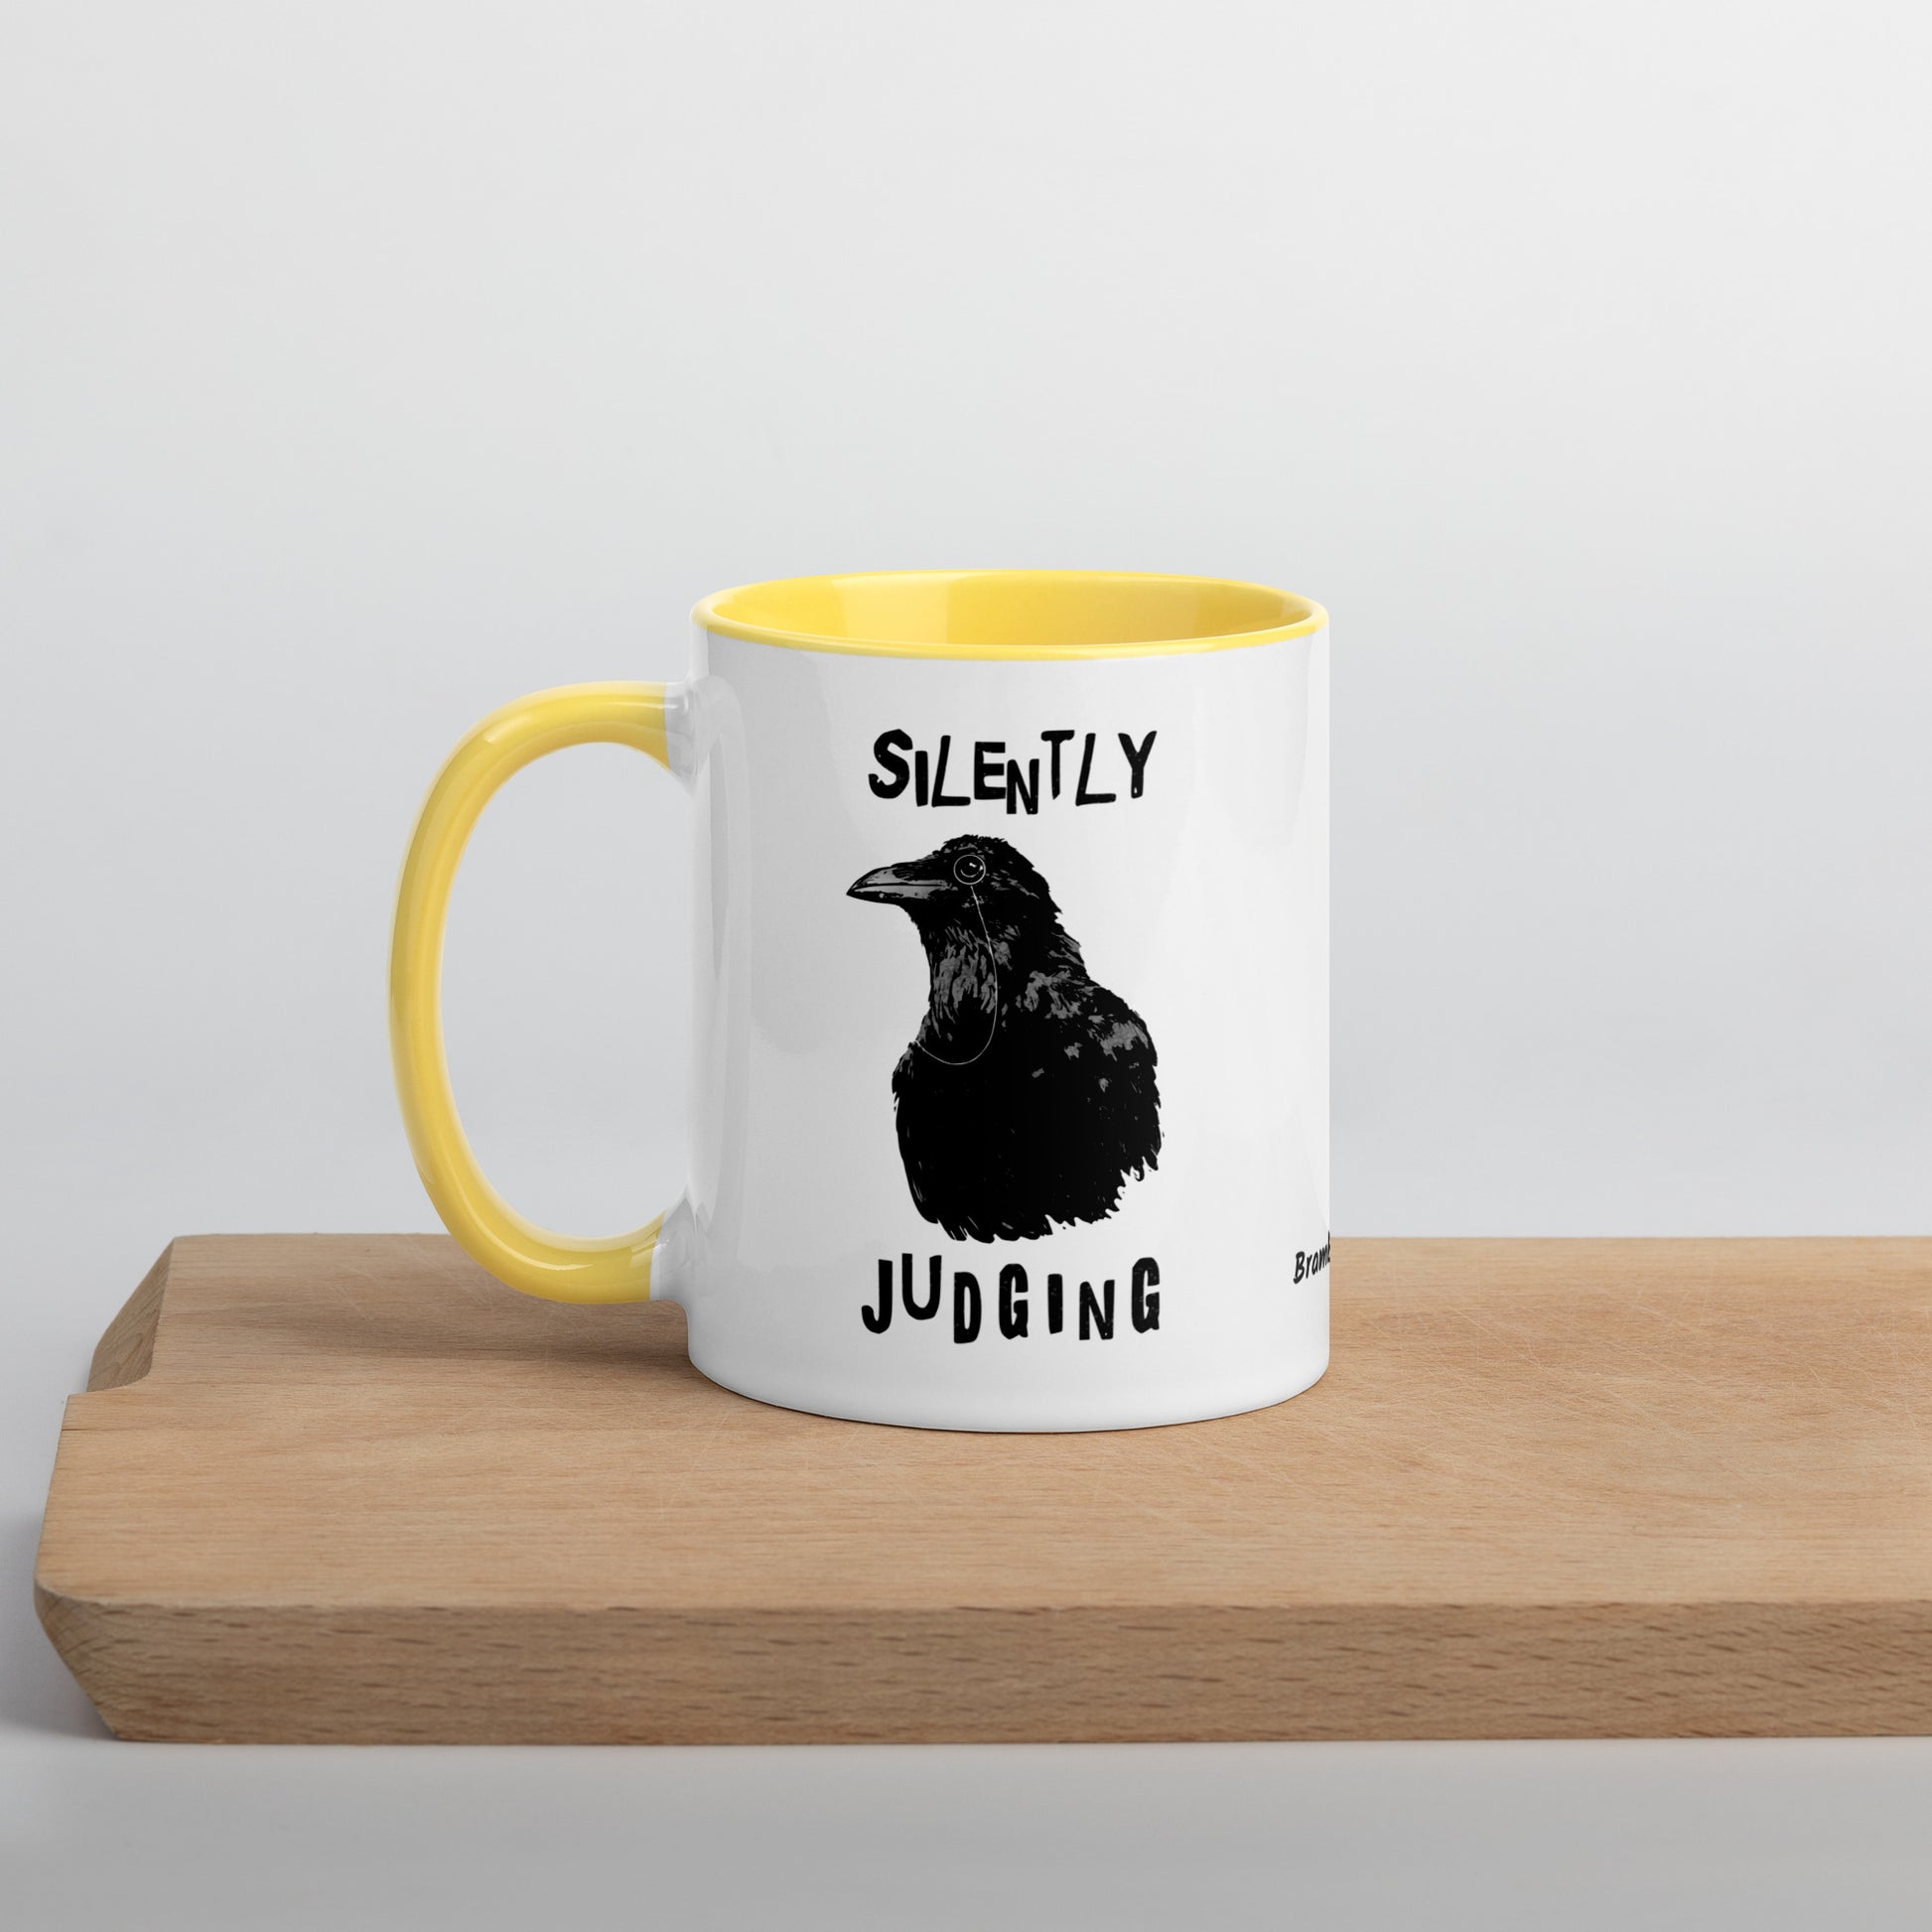 11 ounce ceramic mug with Silently Judging text surrounding a monacle-wearing crow. Double-sided design. Mug has yellow rim, handle, and inside. Shown sitting on wooden cutting board.